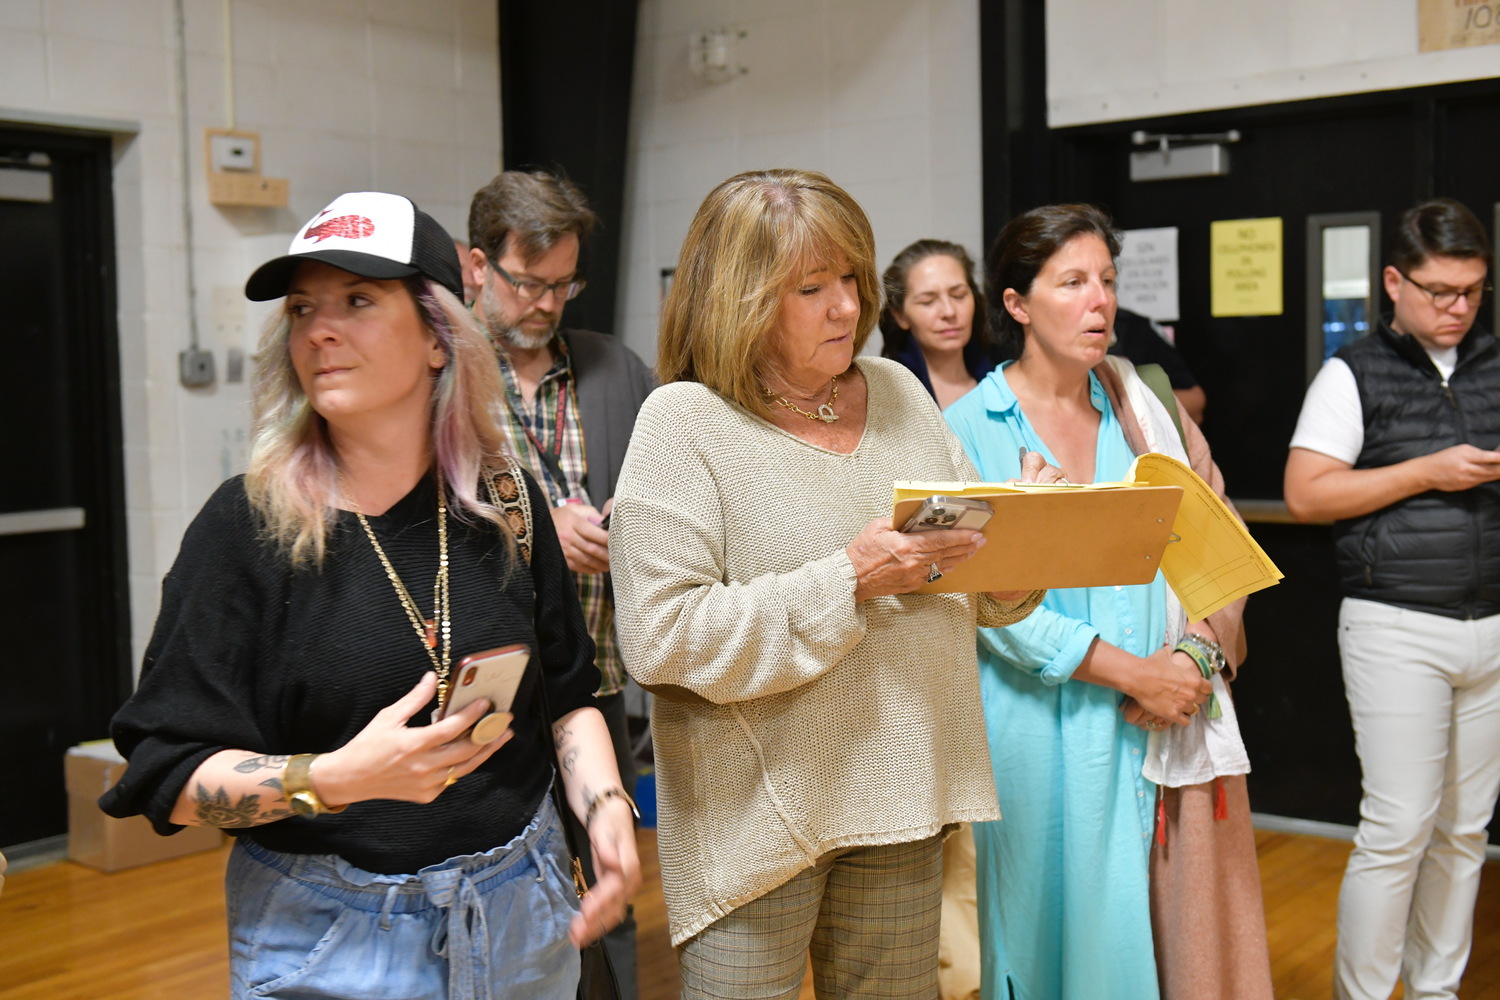 Sag Harbor parent Michele Liot, left, a vocal supporter of the Marsden purchase, and board of education president Sandi Kruel after the announcement that the Marsden proposition had failed by 75 votes. DANA SHAW